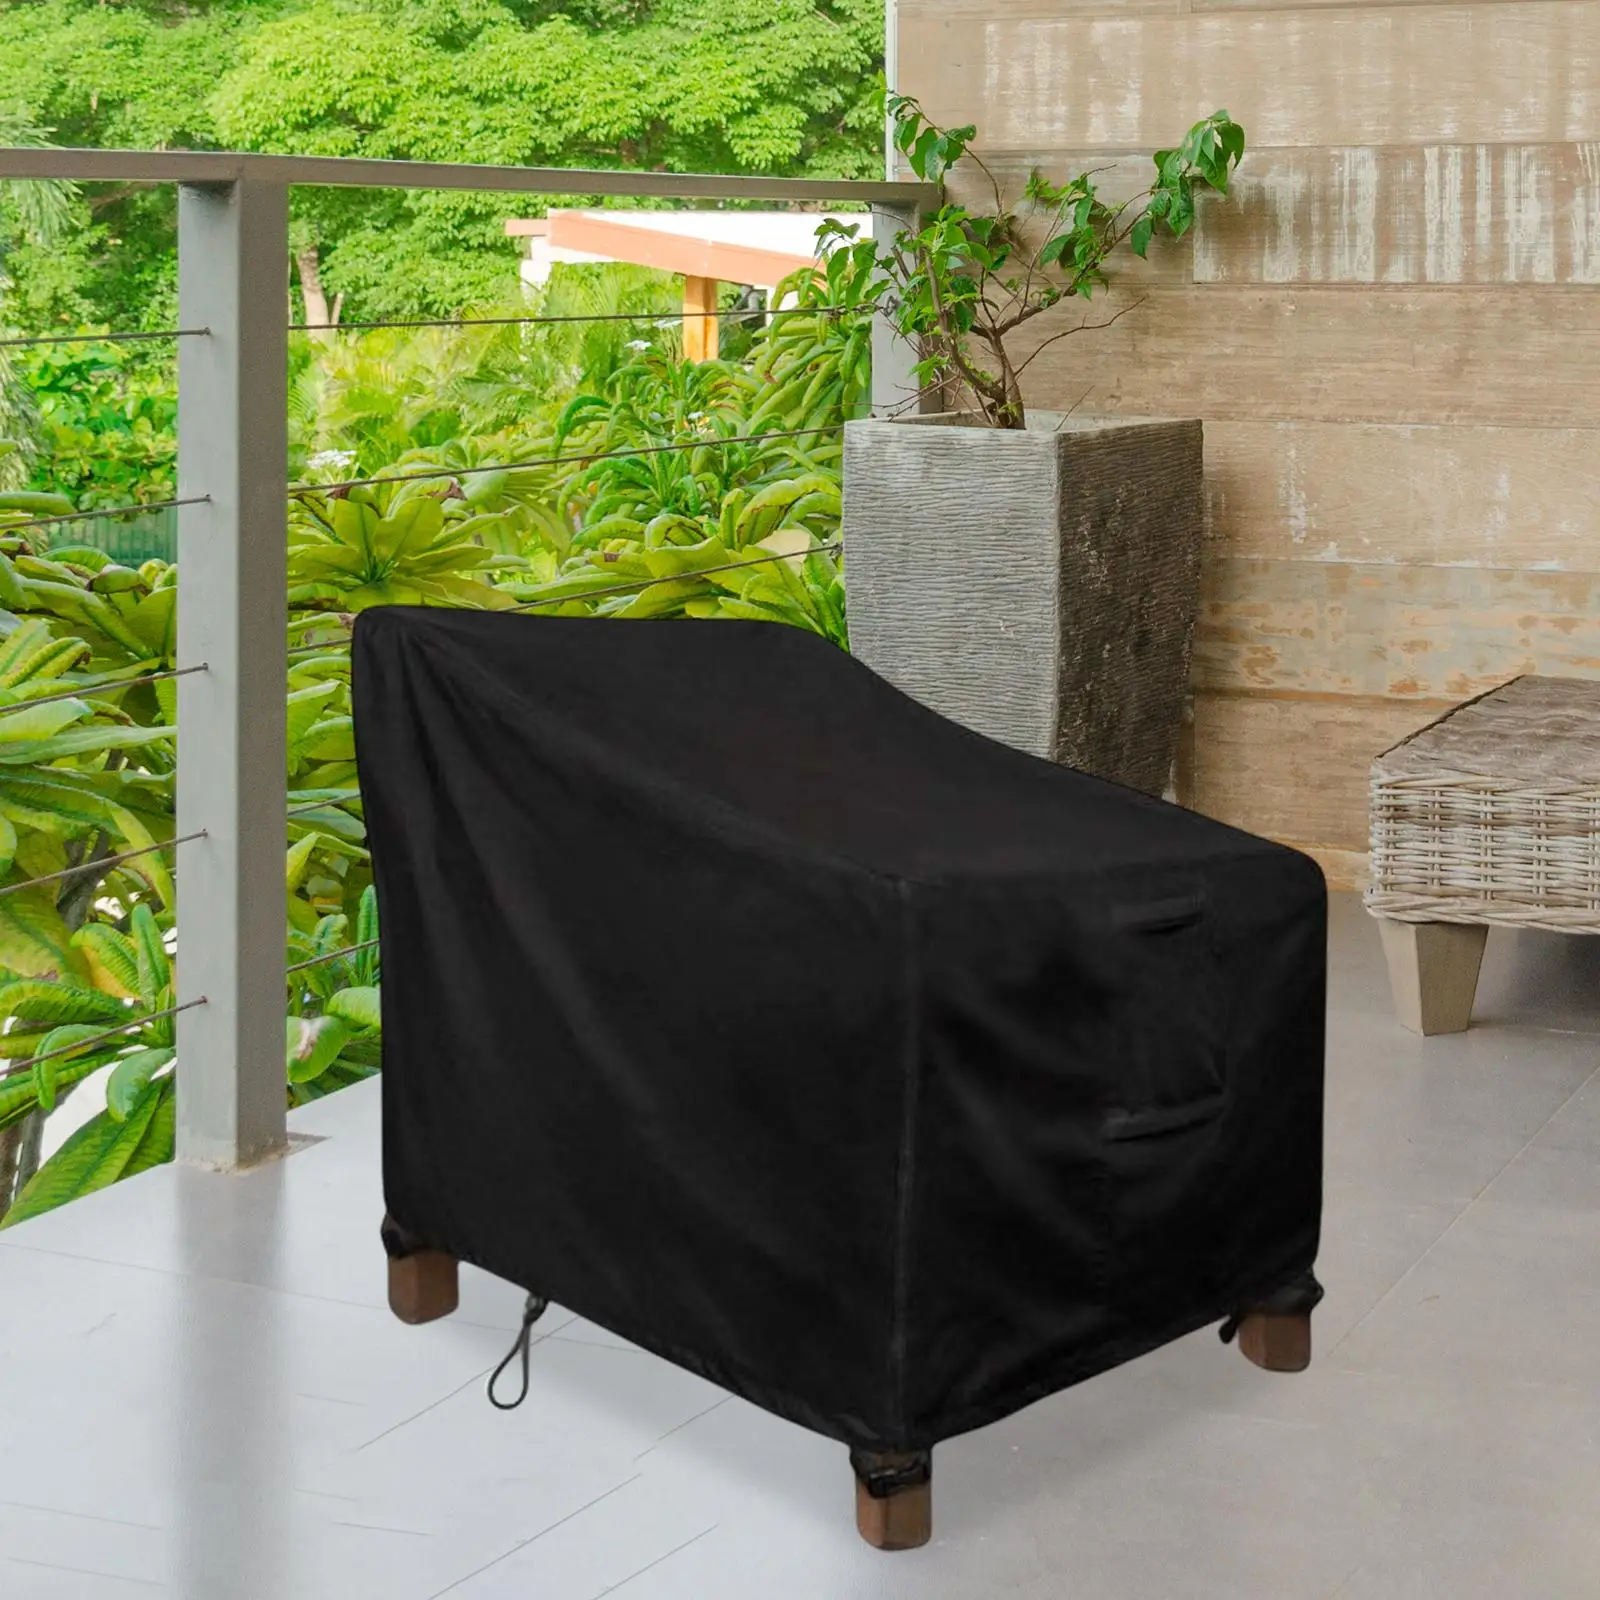 Stacked Chair Dust Cover Storage Bag Outdoor Garden Patio Furniture Protector Waterproof Dustproof Chair Seat Protection Cover